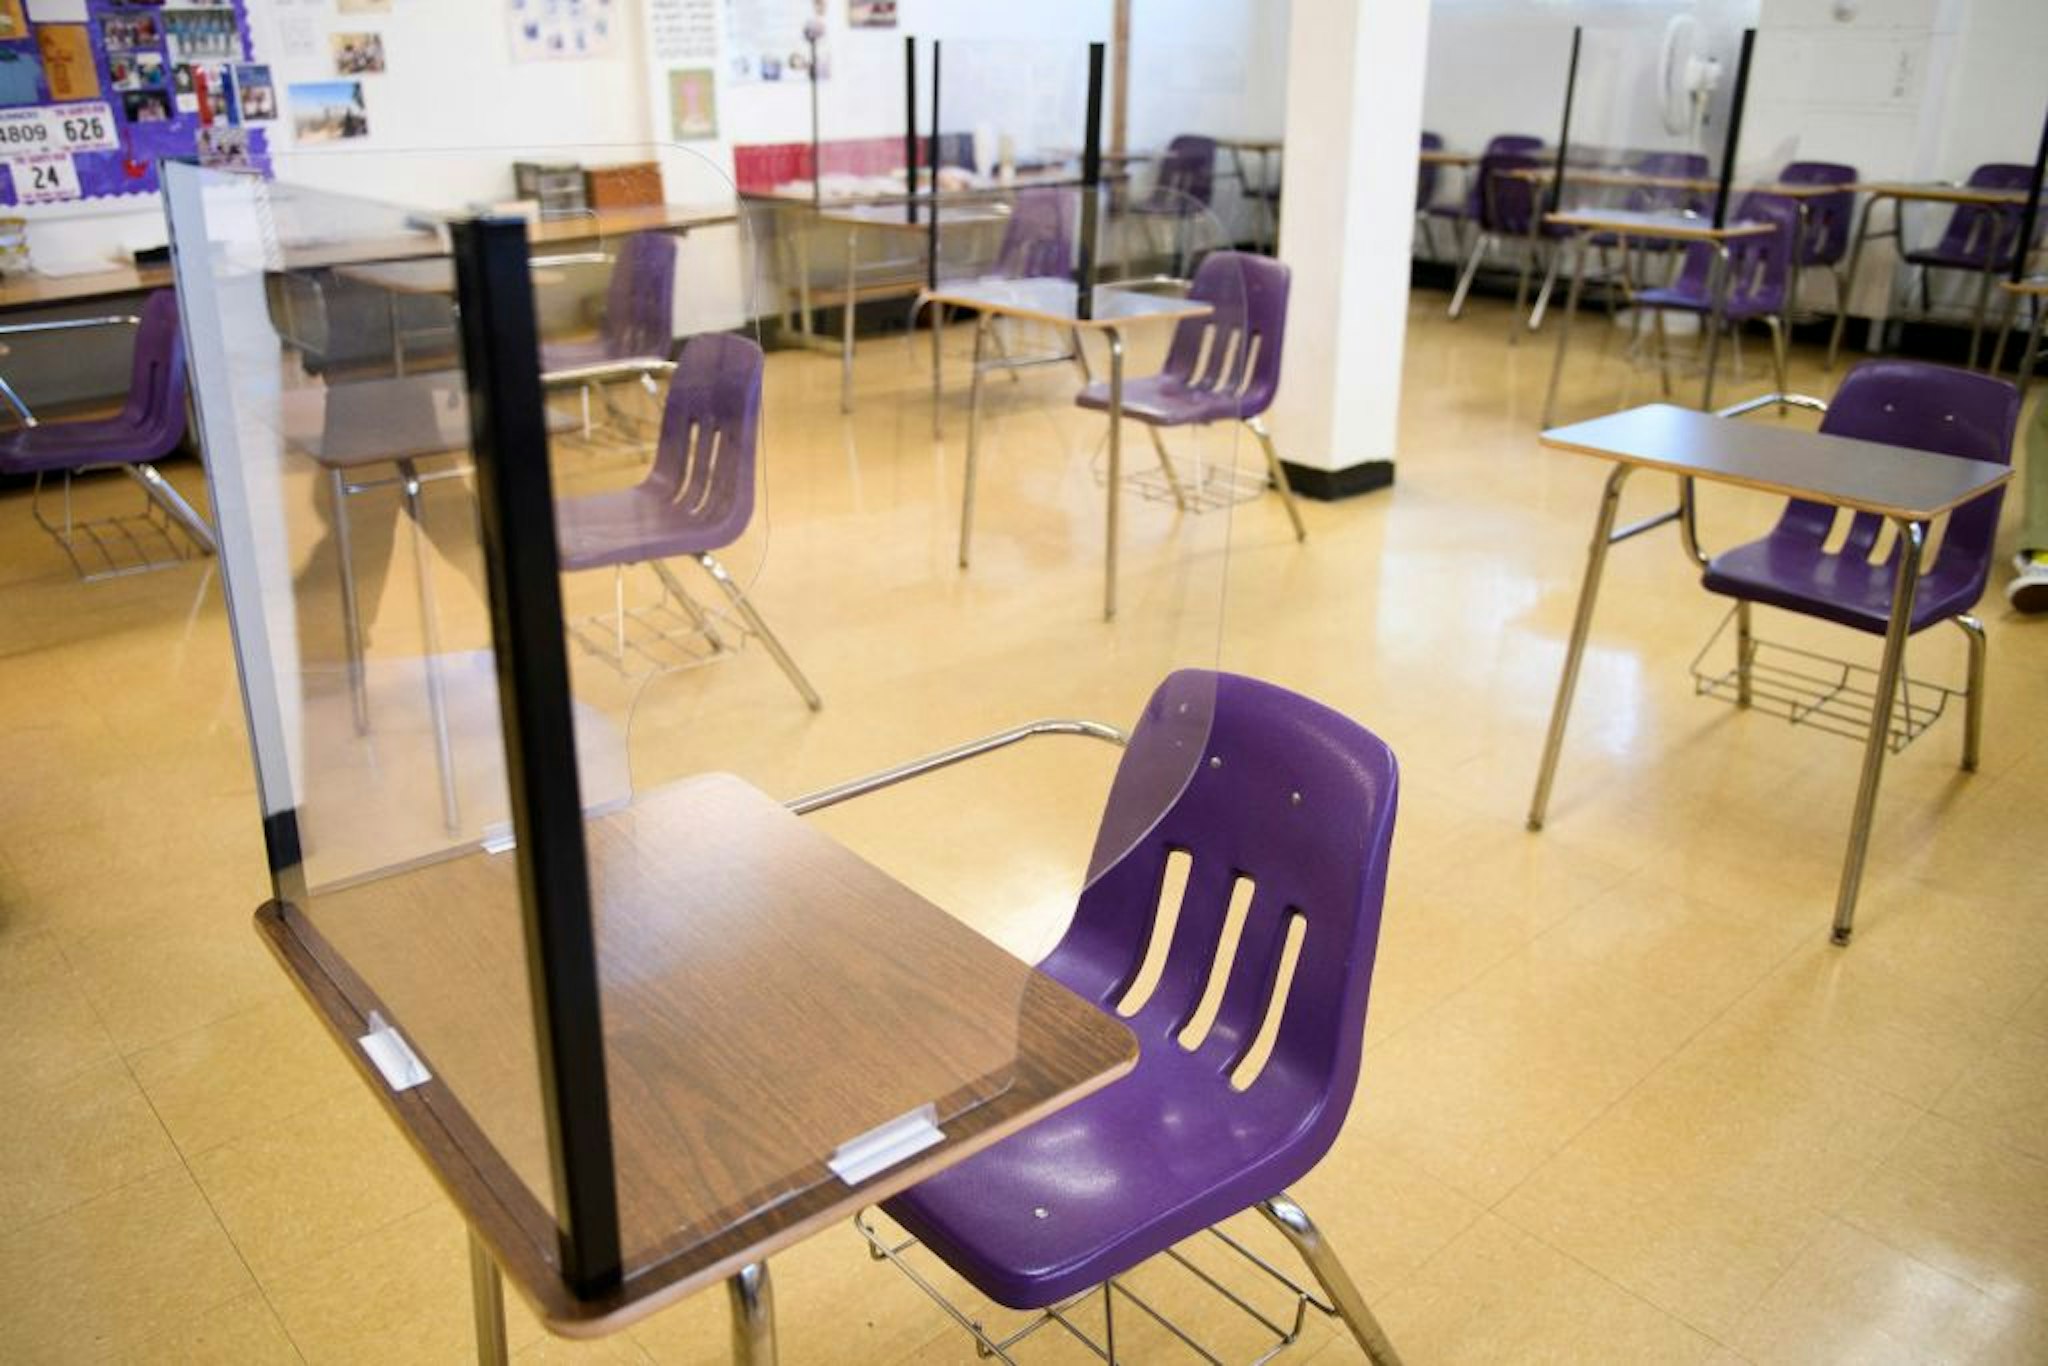 Plexiglass dividers surround desks as students return to in-person learning at St. Anthony Catholic High School during the Covid-19 pandemic on March 24, 2021 in Long Beach, California. - The school of 445 students implemented a hybrid learning model, with approximately 60 percent of students returning to in an in-person classroom learning environment with Covid-19 safety measures including face masks, social distancing, plexiglass barriers around desks, outdoor spaces, and schedule changes.